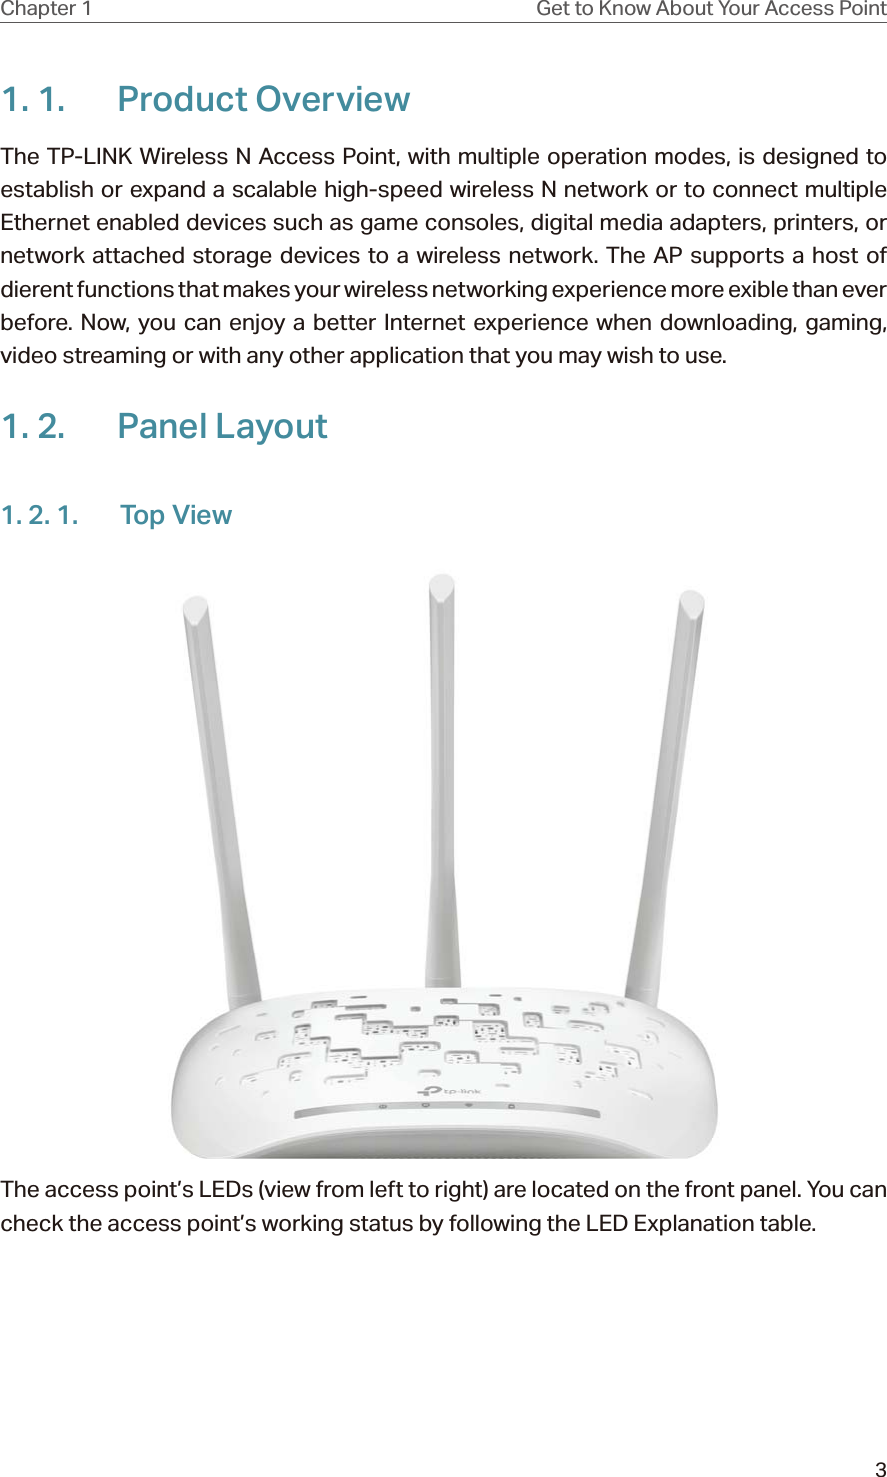 3Chapter 1 Get to Know About Your Access Point1. 1.  Product OverviewThe TP-LINK Wireless N Access Point, with multiple operation modes, is designed to establish or expand a scalable high-speed wireless N network or to connect multiple Ethernet enabled devices such as game consoles, digital media adapters, printers, or network attached storage devices to a wireless network. The AP supports a host of dierent functions that makes your wireless networking experience more exible than ever before. Now, you can enjoy a better Internet experience when downloading, gaming, video streaming or with any other application that you may wish to use.1. 2.  Panel Layout1. 2. 1.  Top ViewThe access point’s LEDs (view from left to right) are located on the front panel. You can check the access point’s working status by following the LED Explanation table.